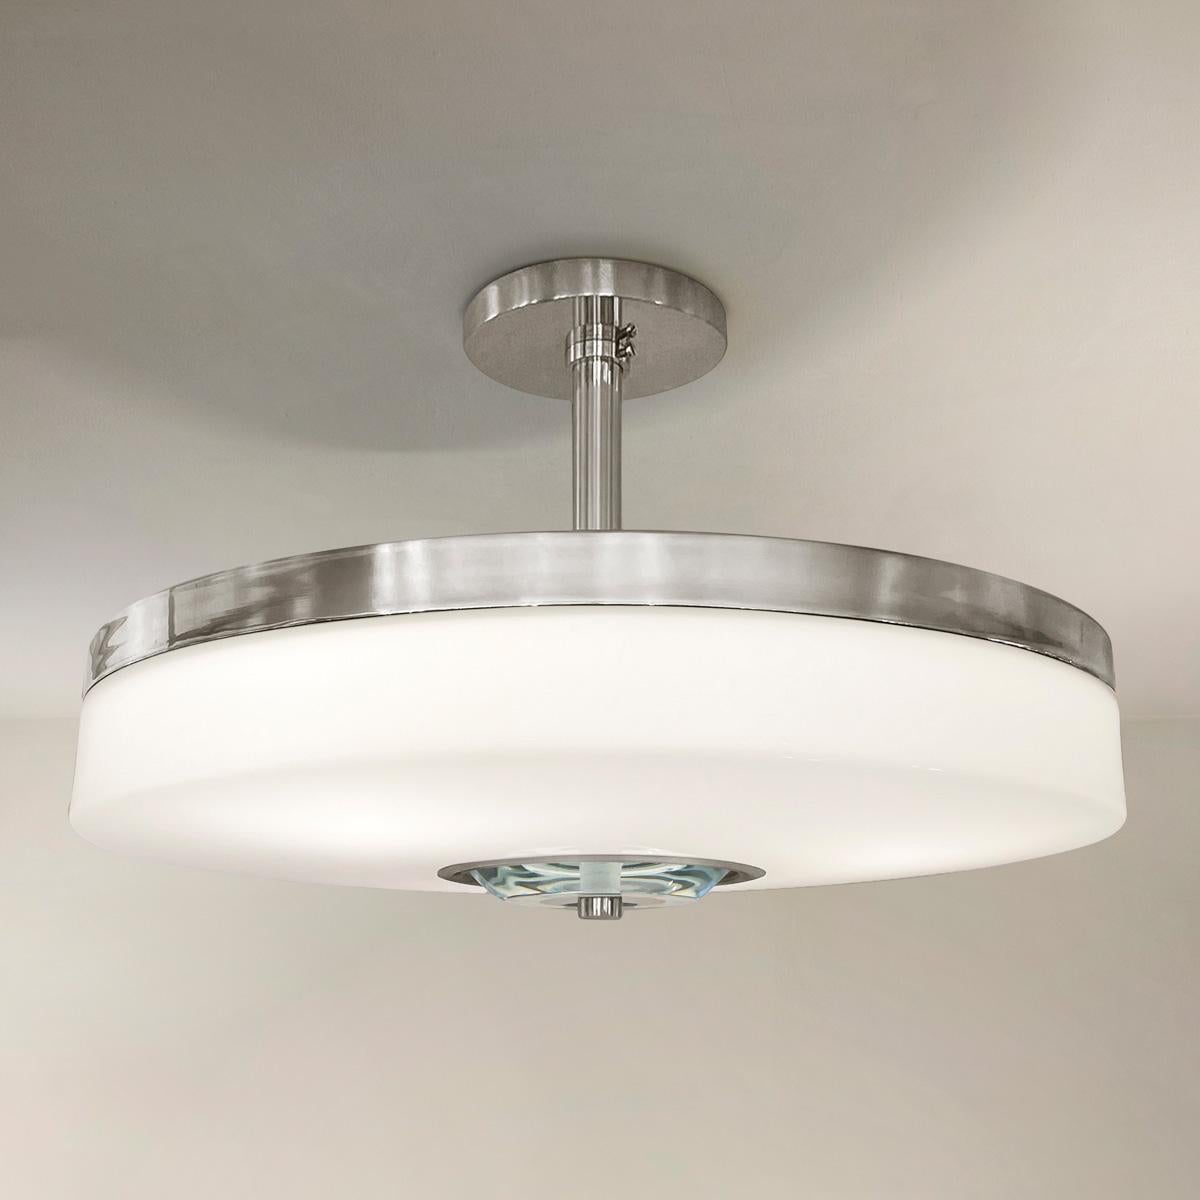 Modern Iris Piccolo Ceiling Light by Gaspare Asaro- Polished Nickel Finish For Sale